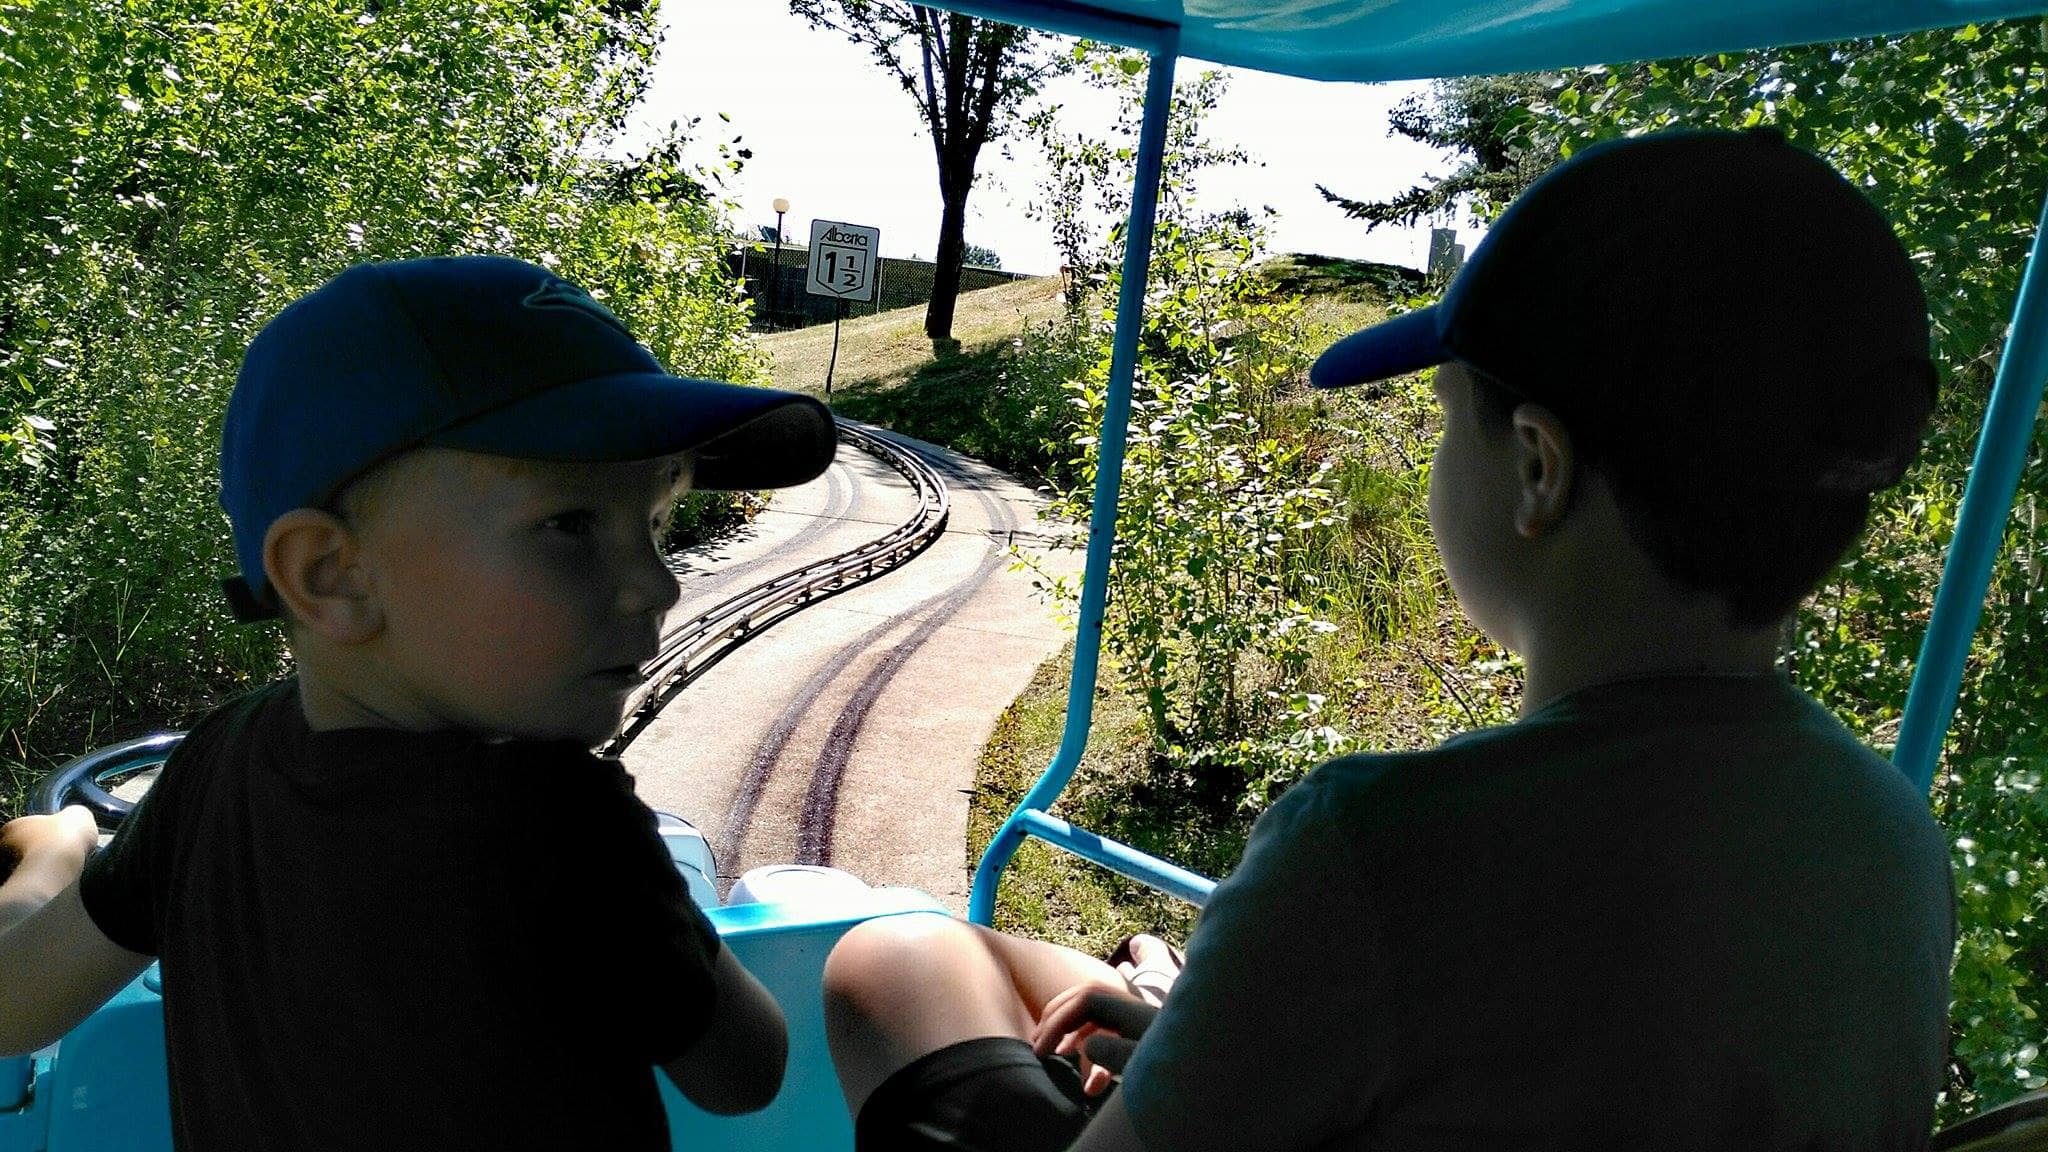 Kids on the train ride at Calaway Park